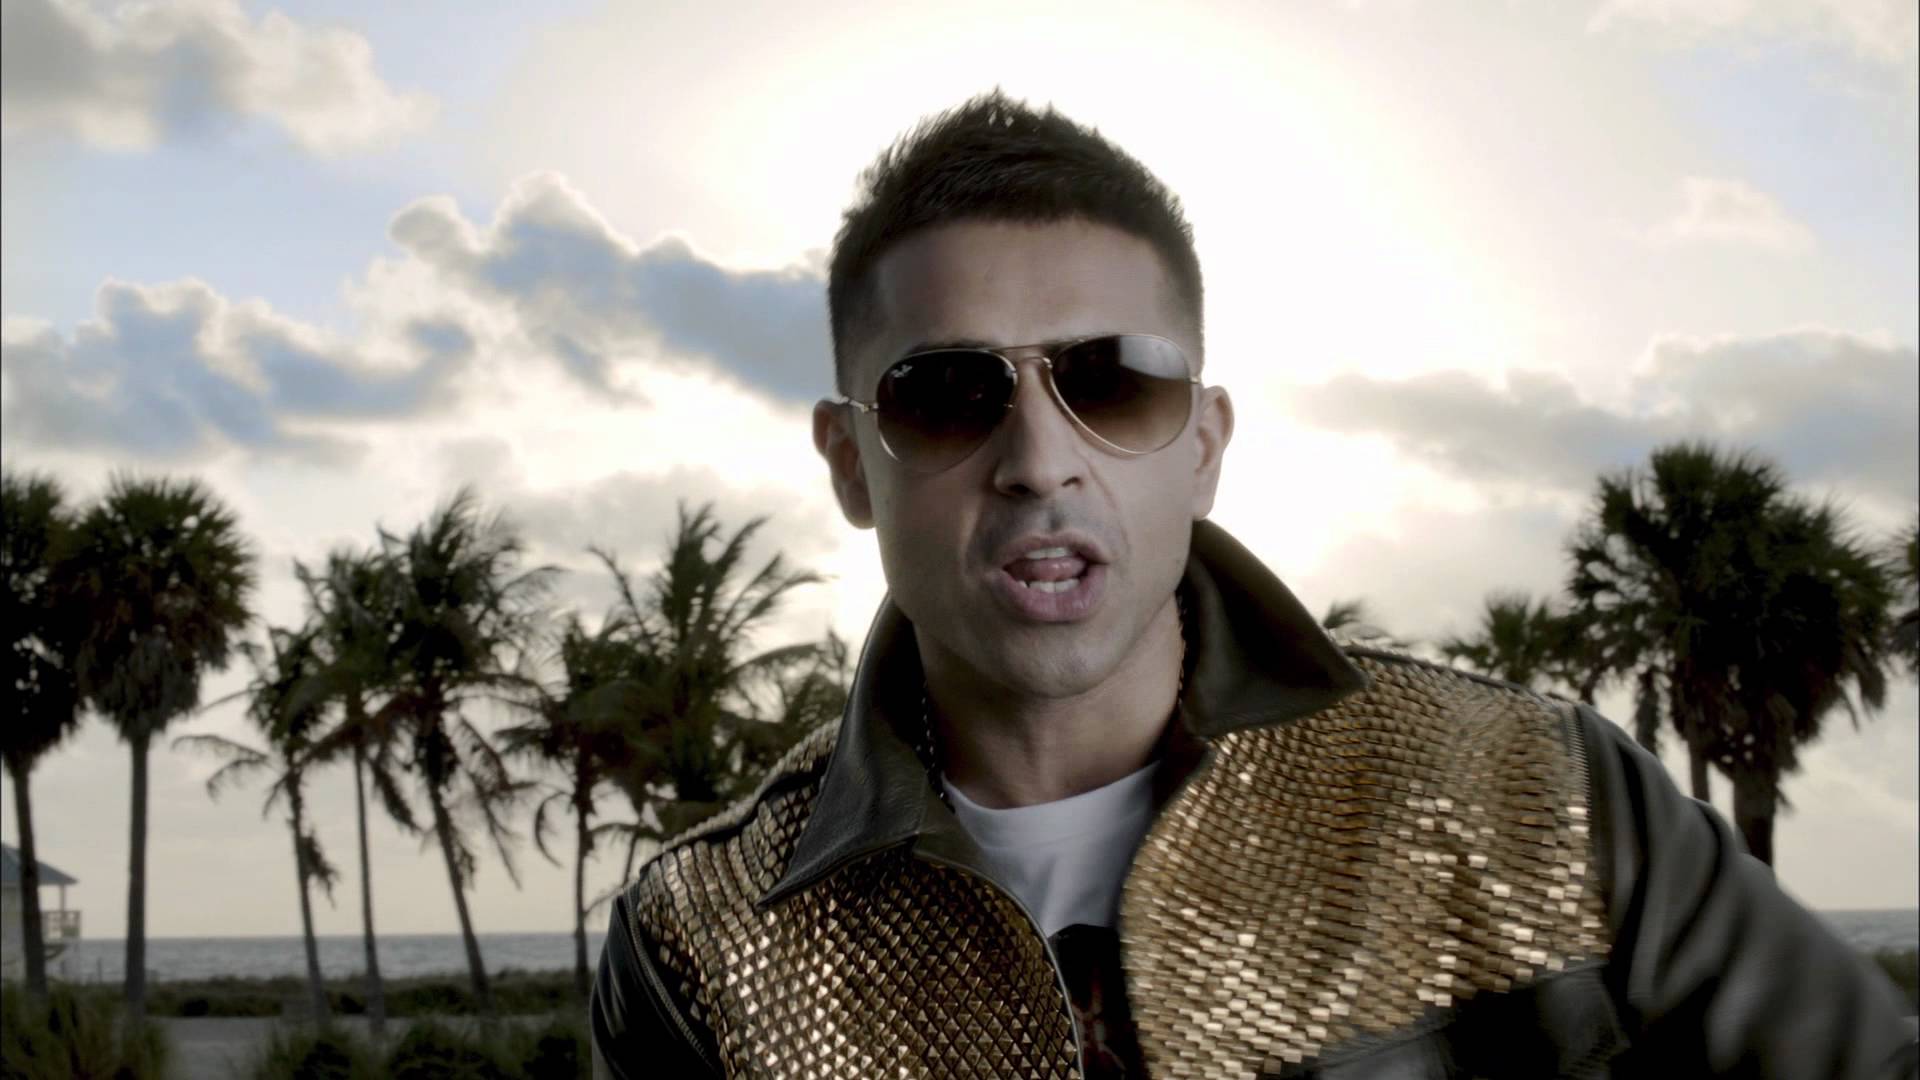 Jay Sean – I'm All Yours (ft. Pitbull)